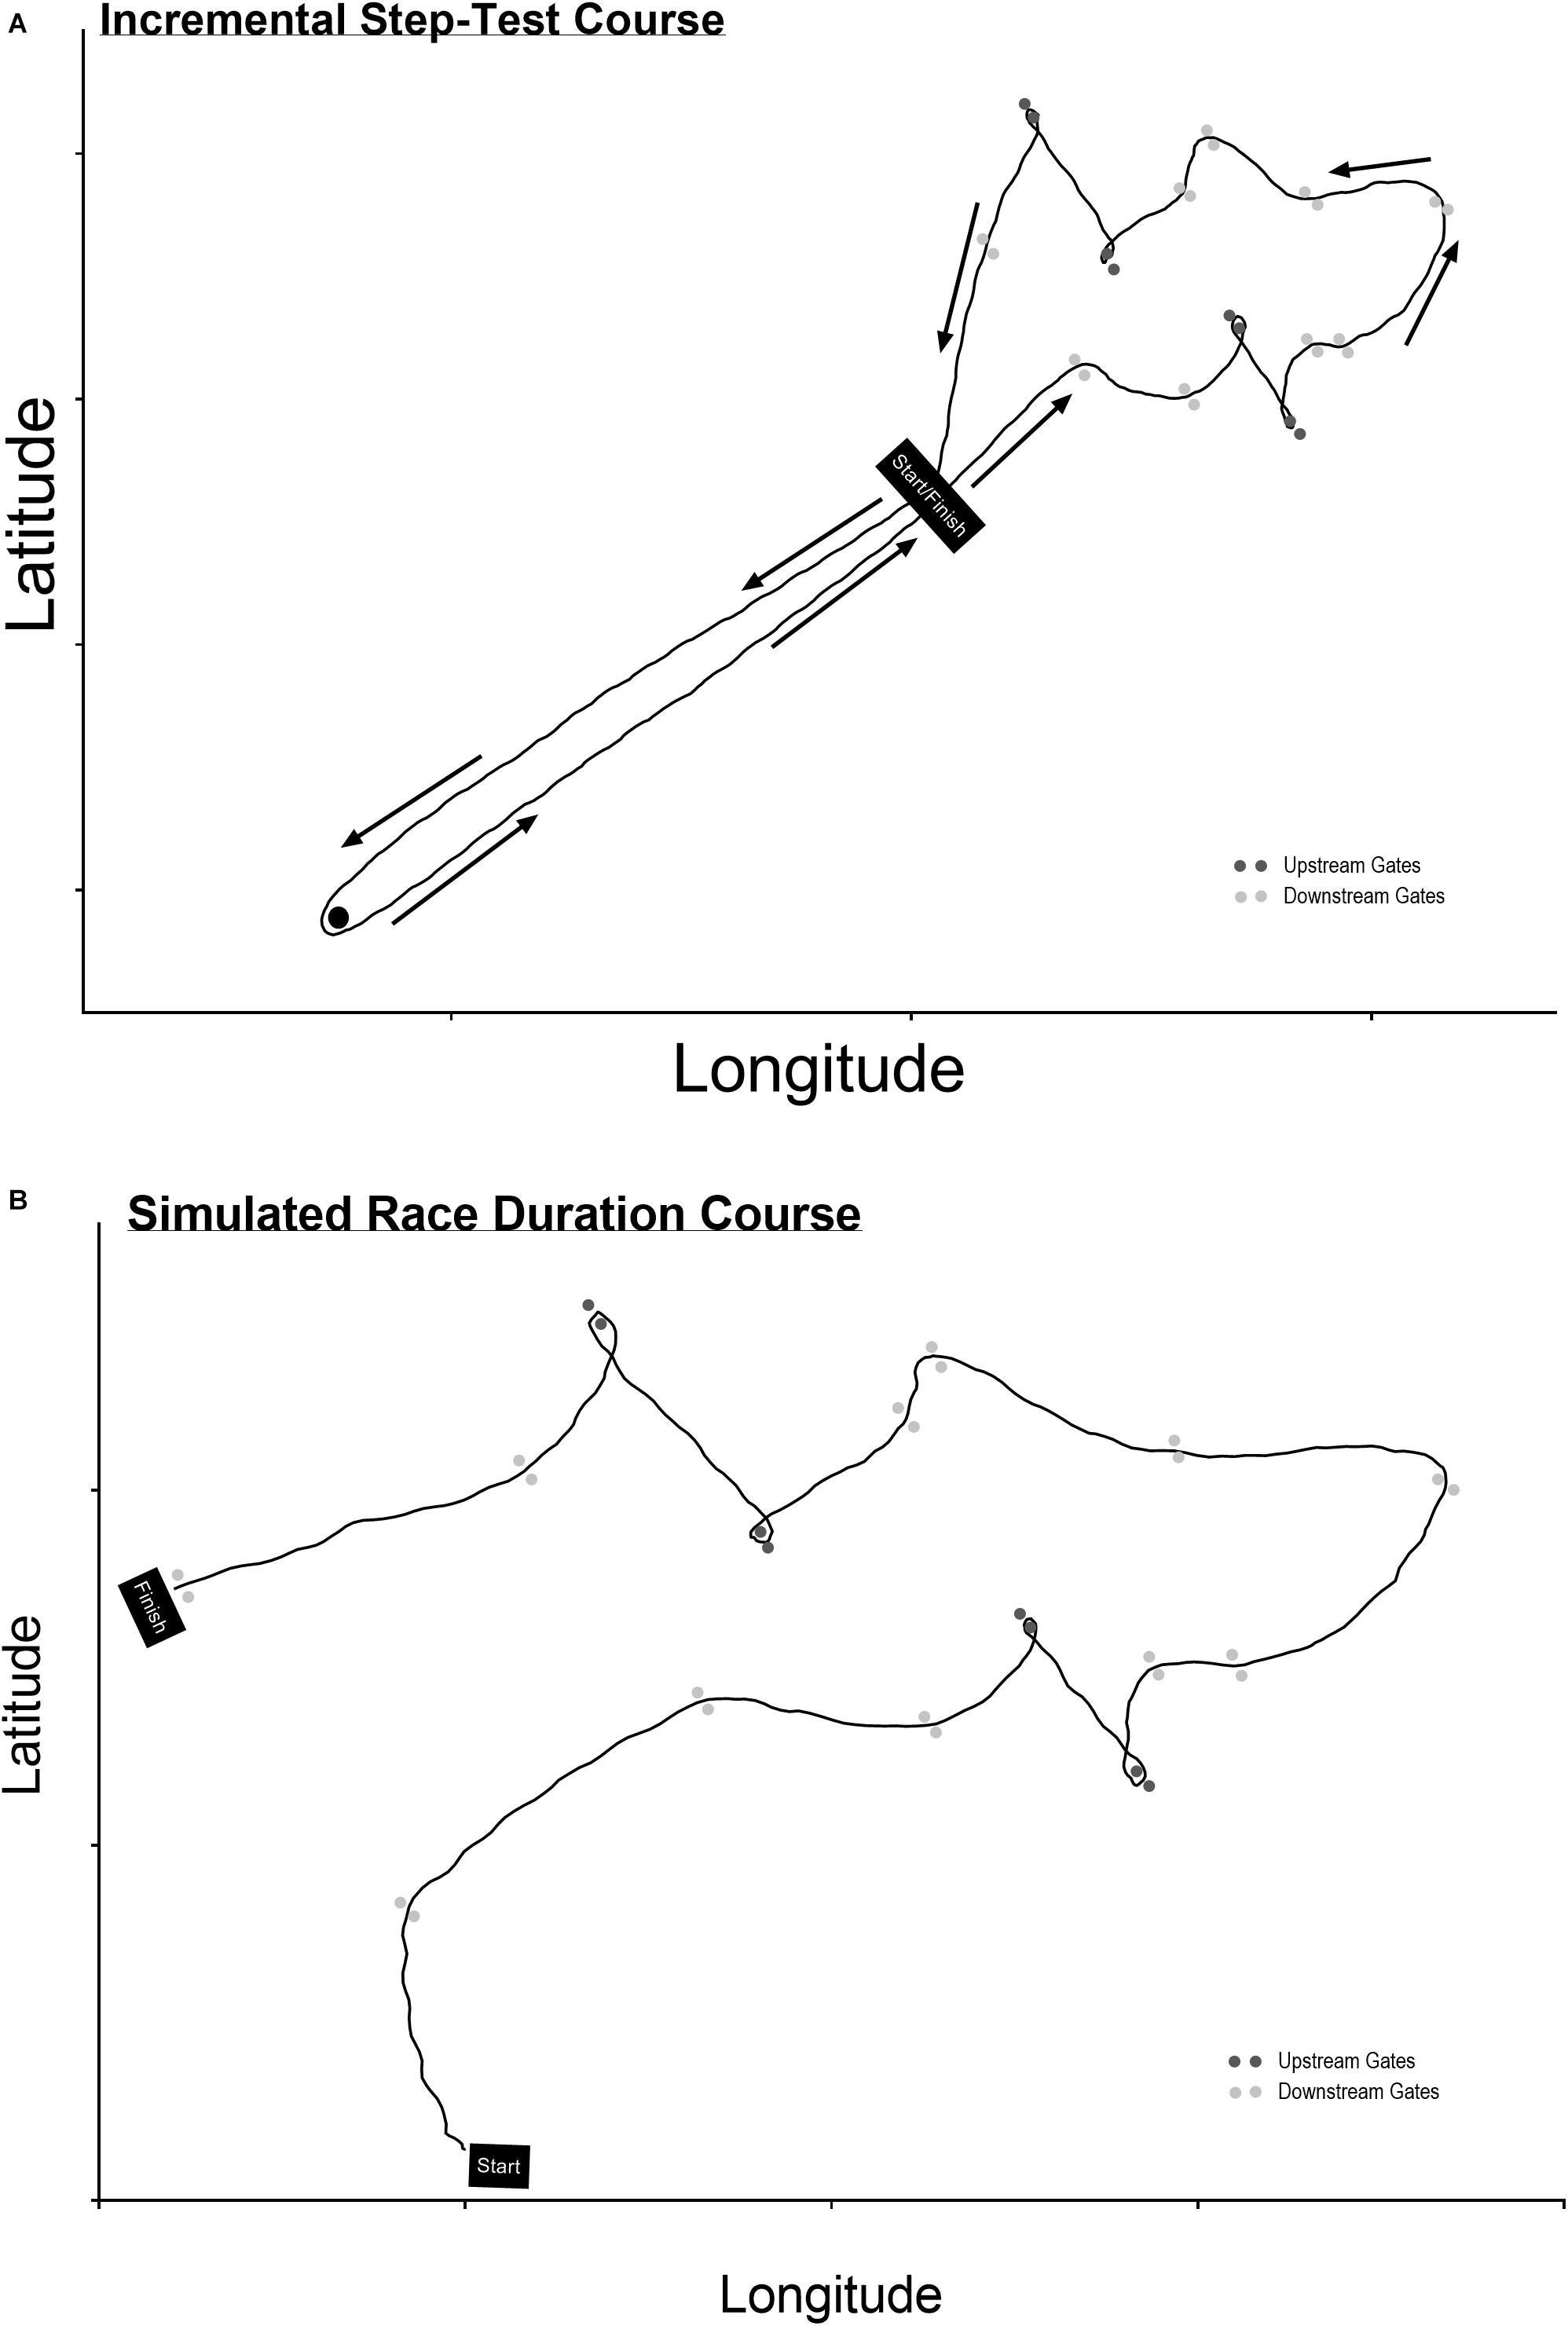 Frontiers Mechanical Work and Physiological Responses to Simulated Flat Water Slalom Kayaking